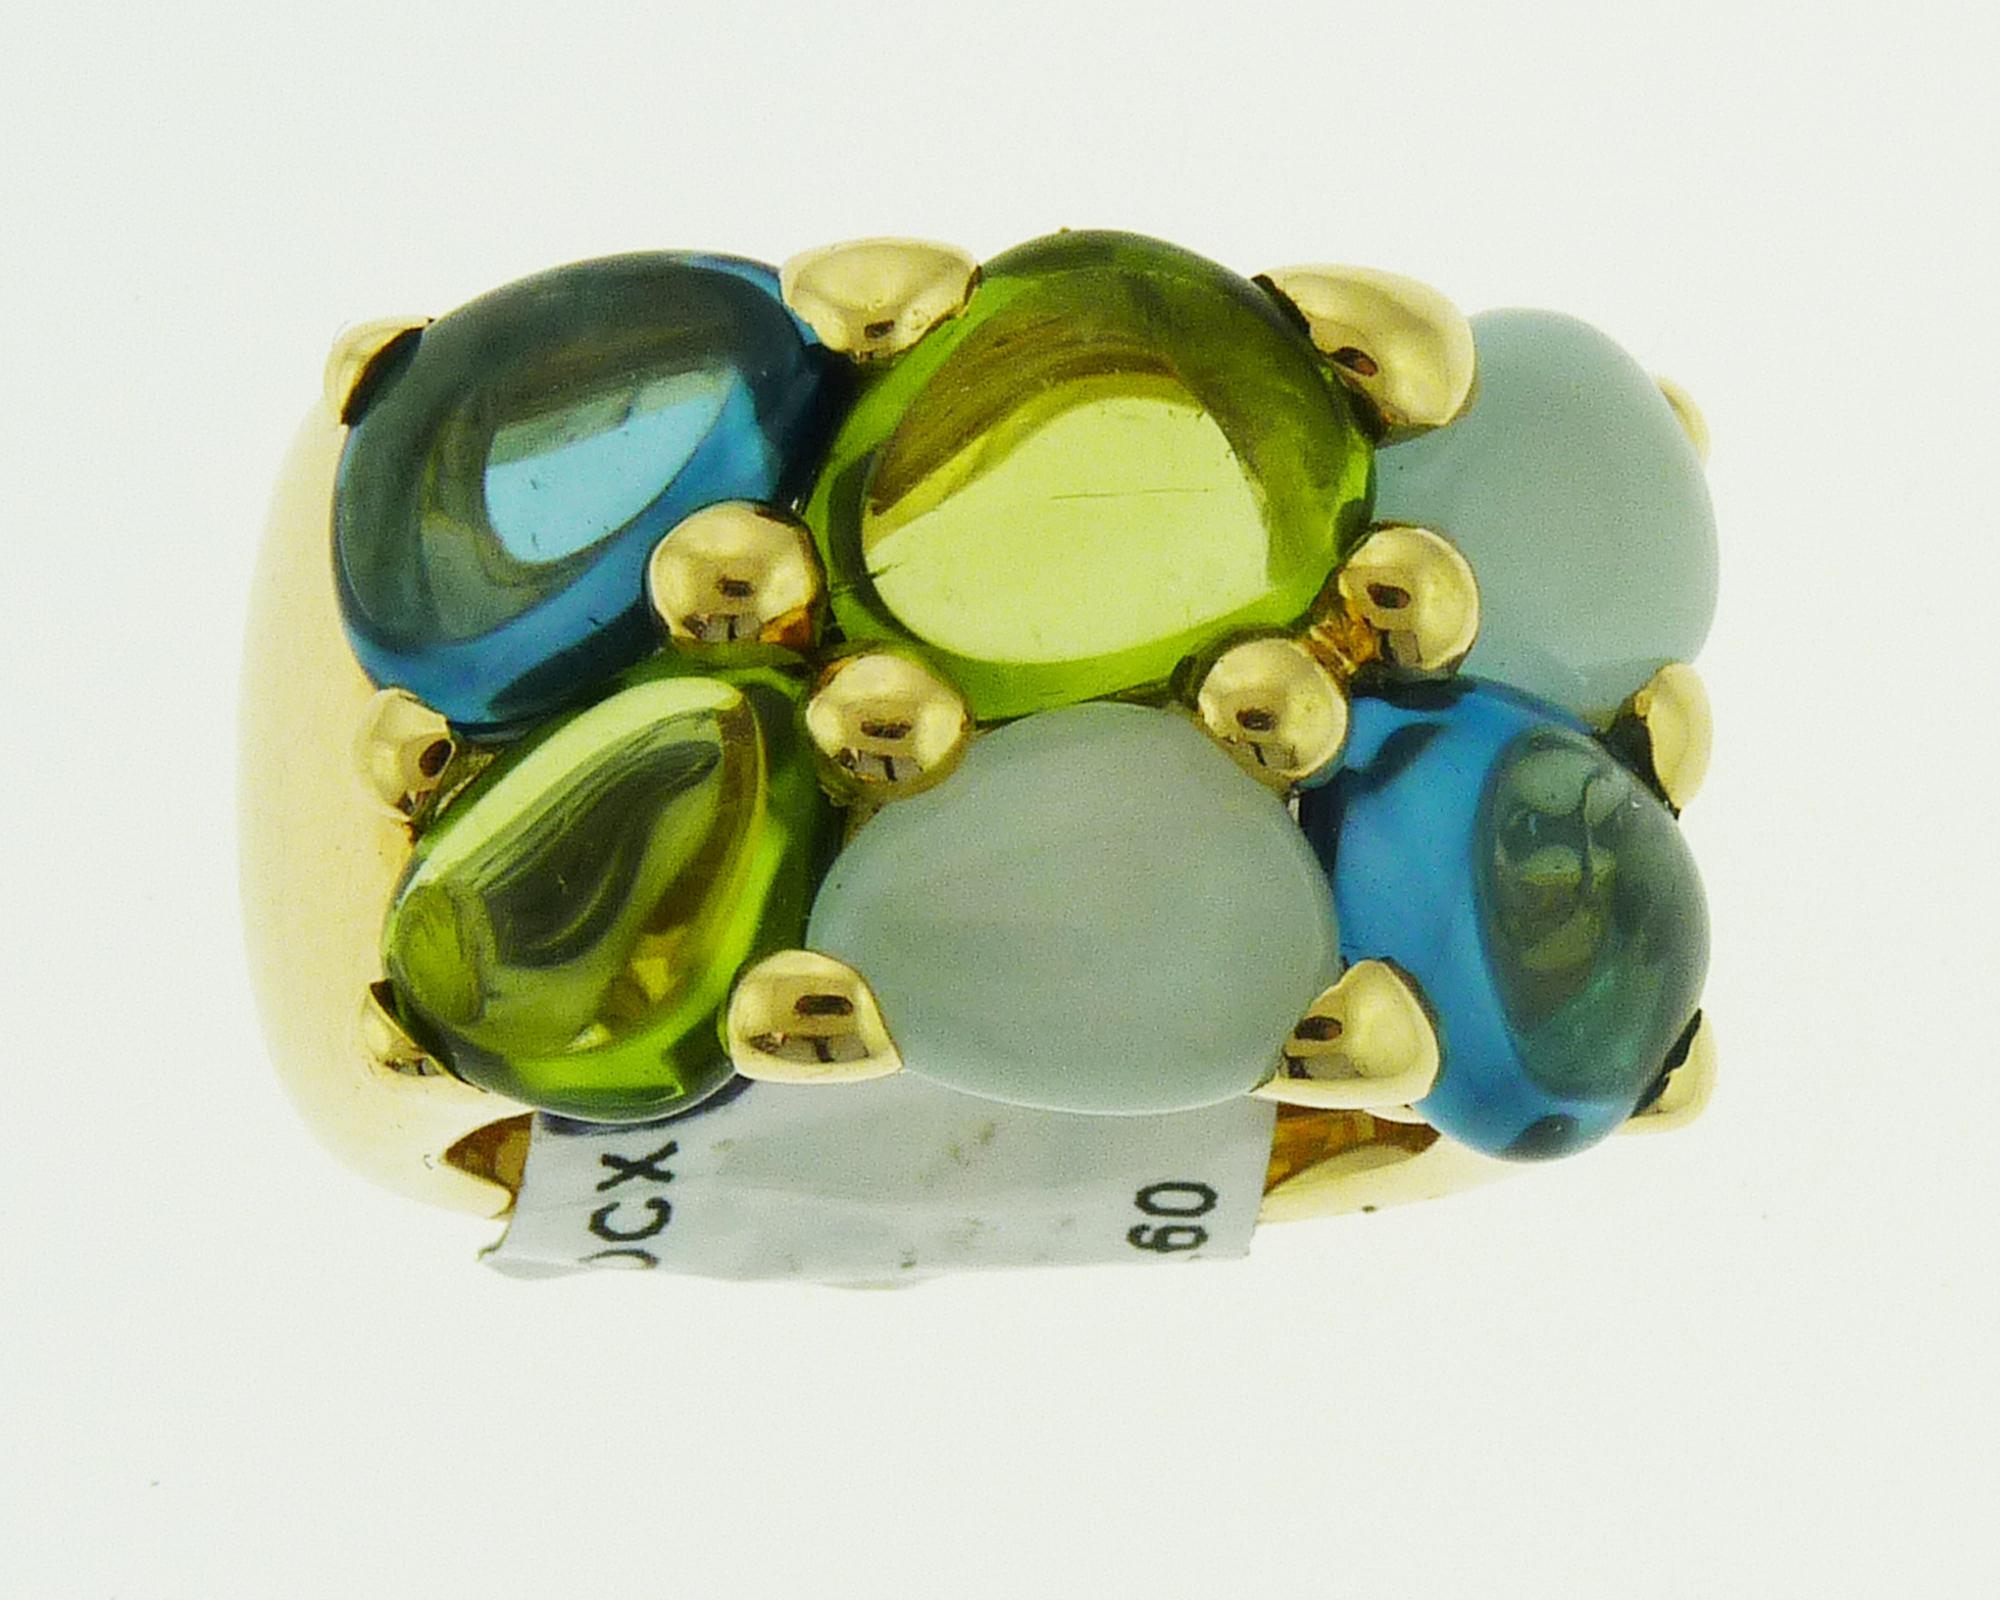 Beautiful ring created by Pomellato featuring 4.40 carats of free shape peridot, 4.20 carats of free shape blue topaz, 4.00 carats of free shape aquamarine. 
Signed Pomellato. 
Weight of the ring is 26.00.
Size 6.